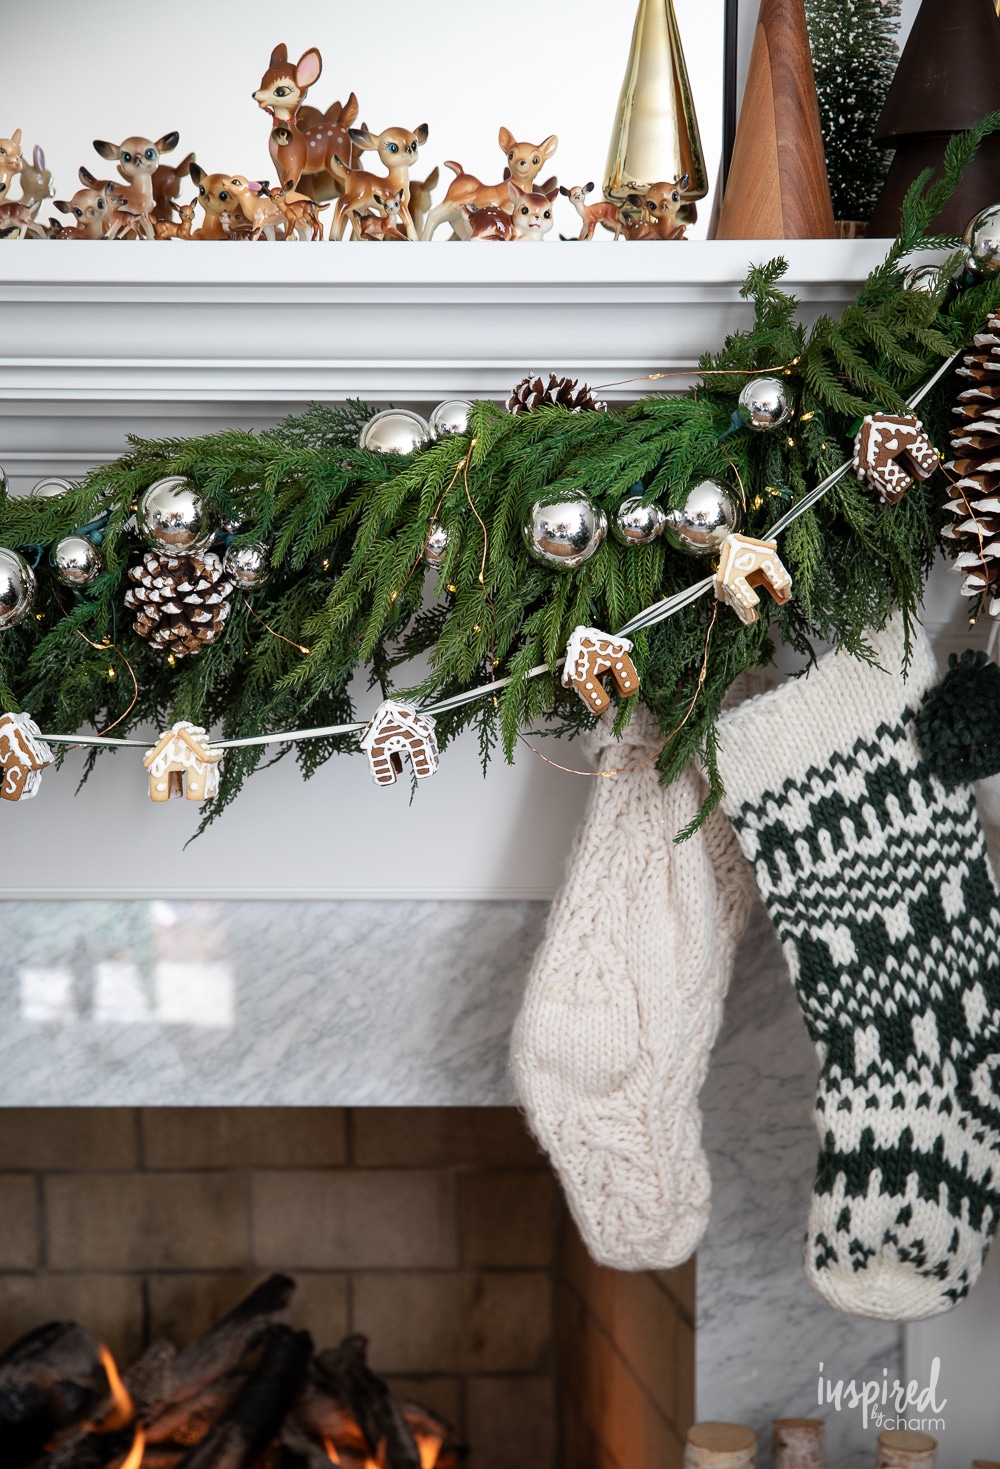 fireplace mantel with garland decor and stockings.